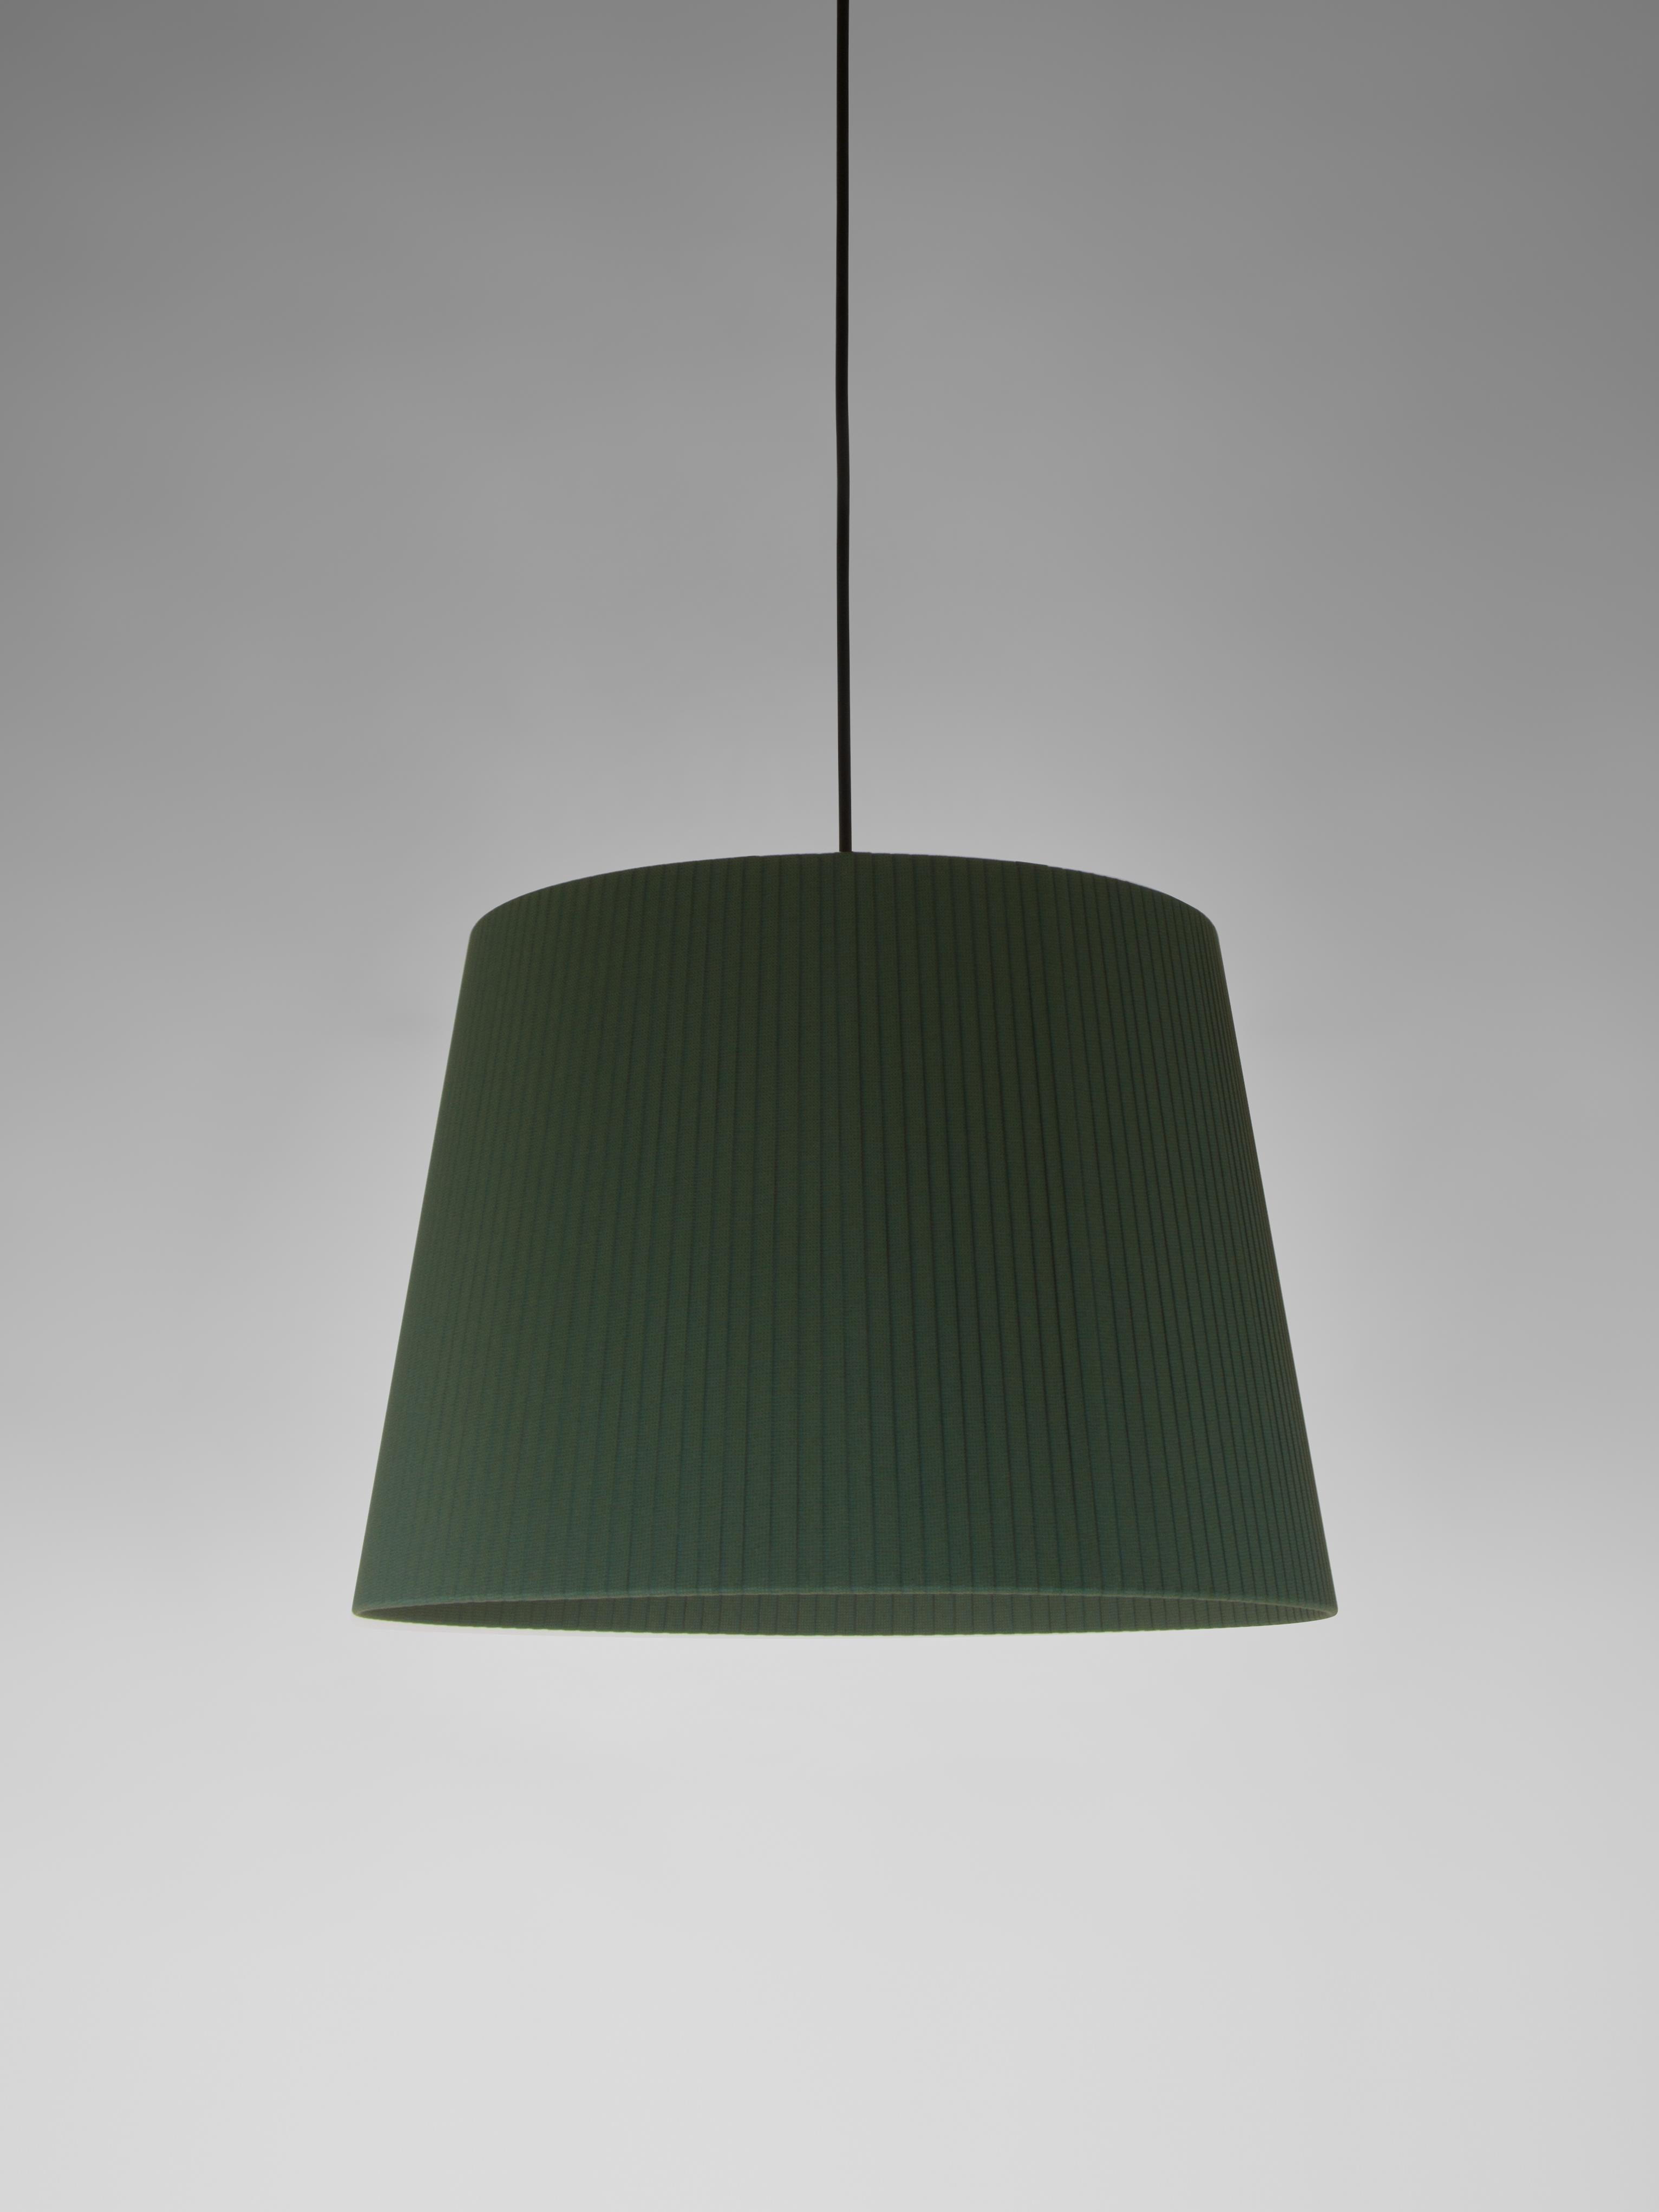 Green Sísísí Cónicas GT1 pendant lamp by Santa & Cole
Dimensions: D 45 x H 32 cm
Materials: Metal, ribbon.
Available in other colors.
Also available in two lights version.

The conical shape group has multiple finishes and sizes. It consists